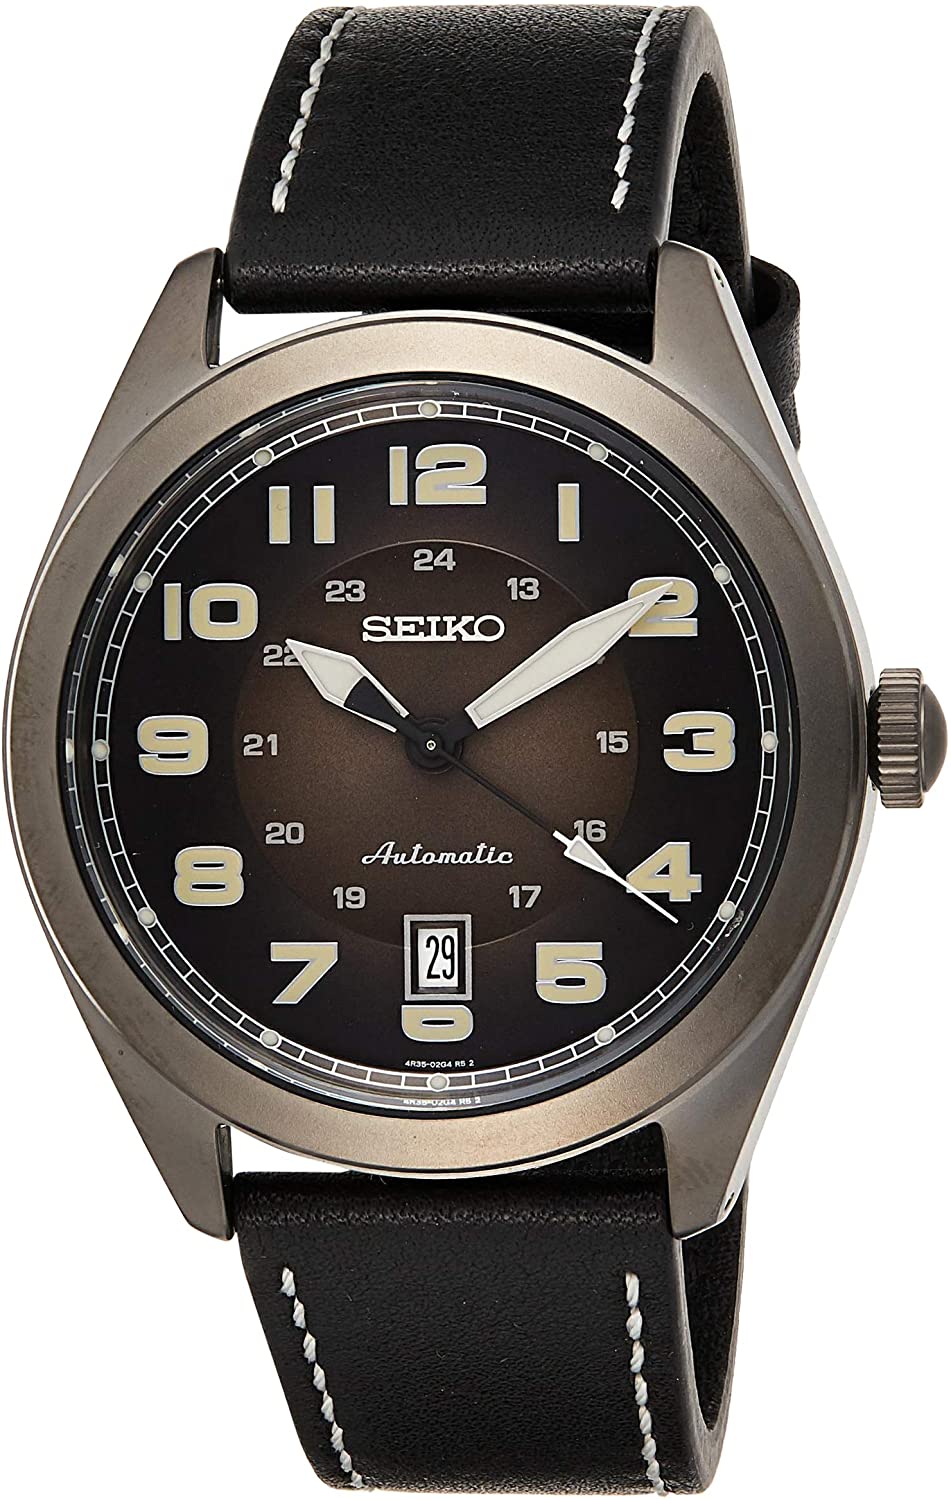 Seiko Men's Automatic Leather Watch SRPC89K1